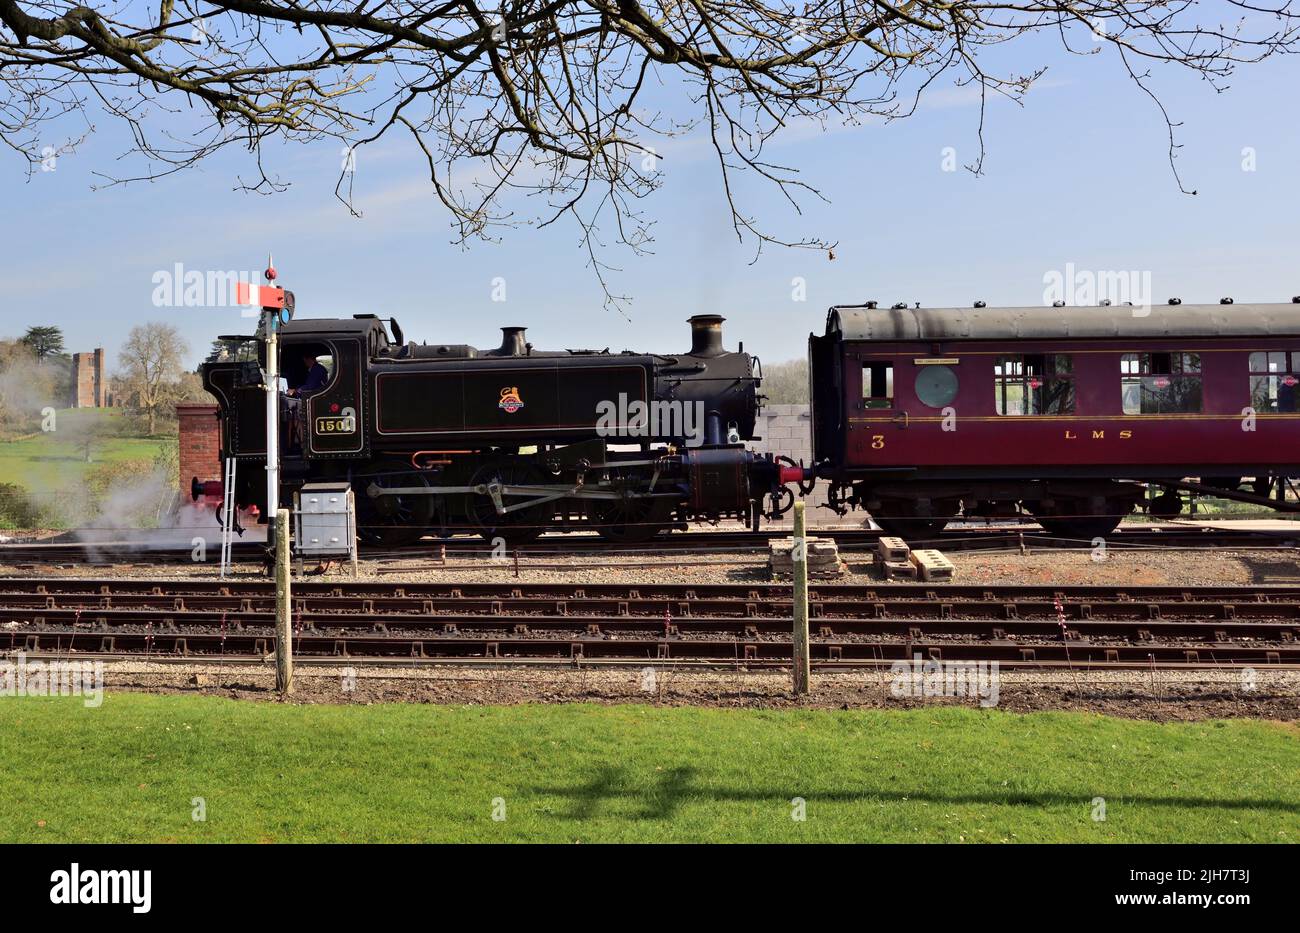 GWR class 1500 tank engine No 1501 in the siding at Arley station on the Severn Valley Railway after hauling a shuttle train from Kidderminster Stock Photo